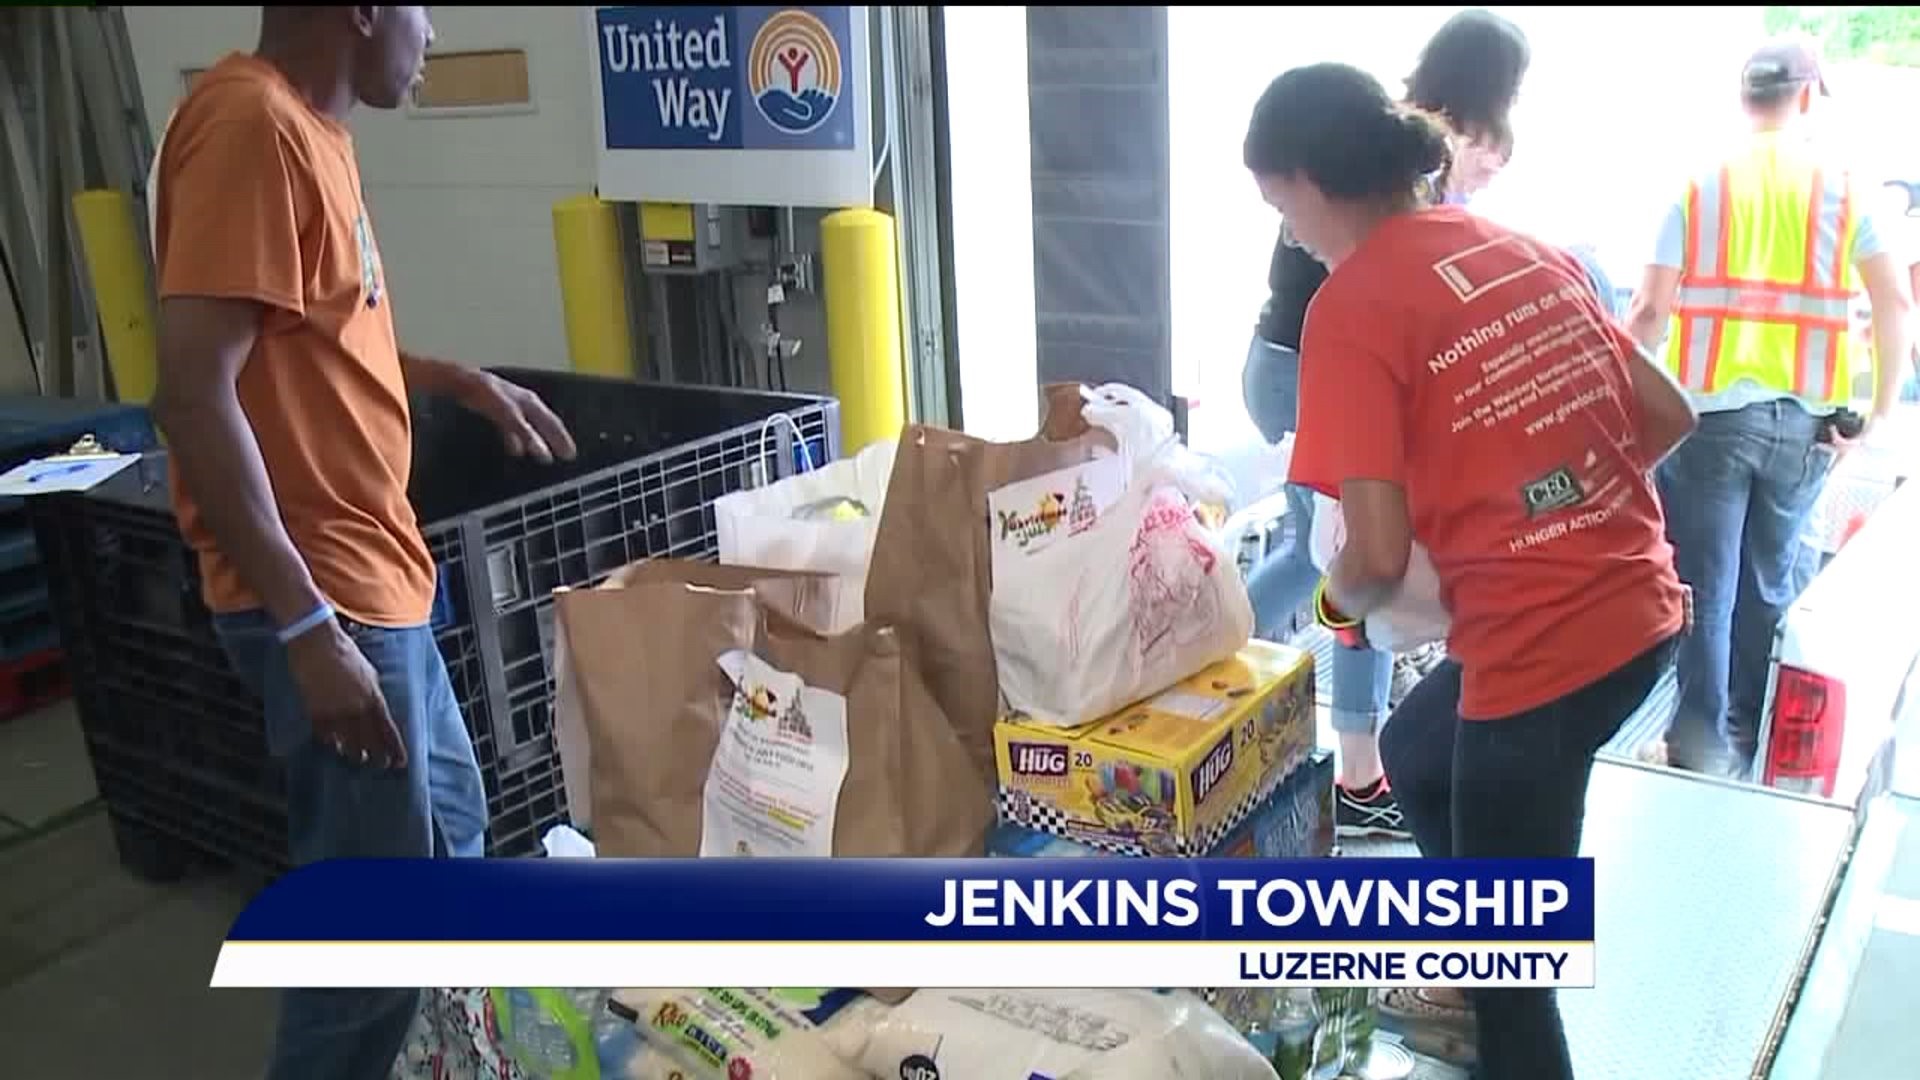 Christmas in July Event Supplies Food for Those in Need